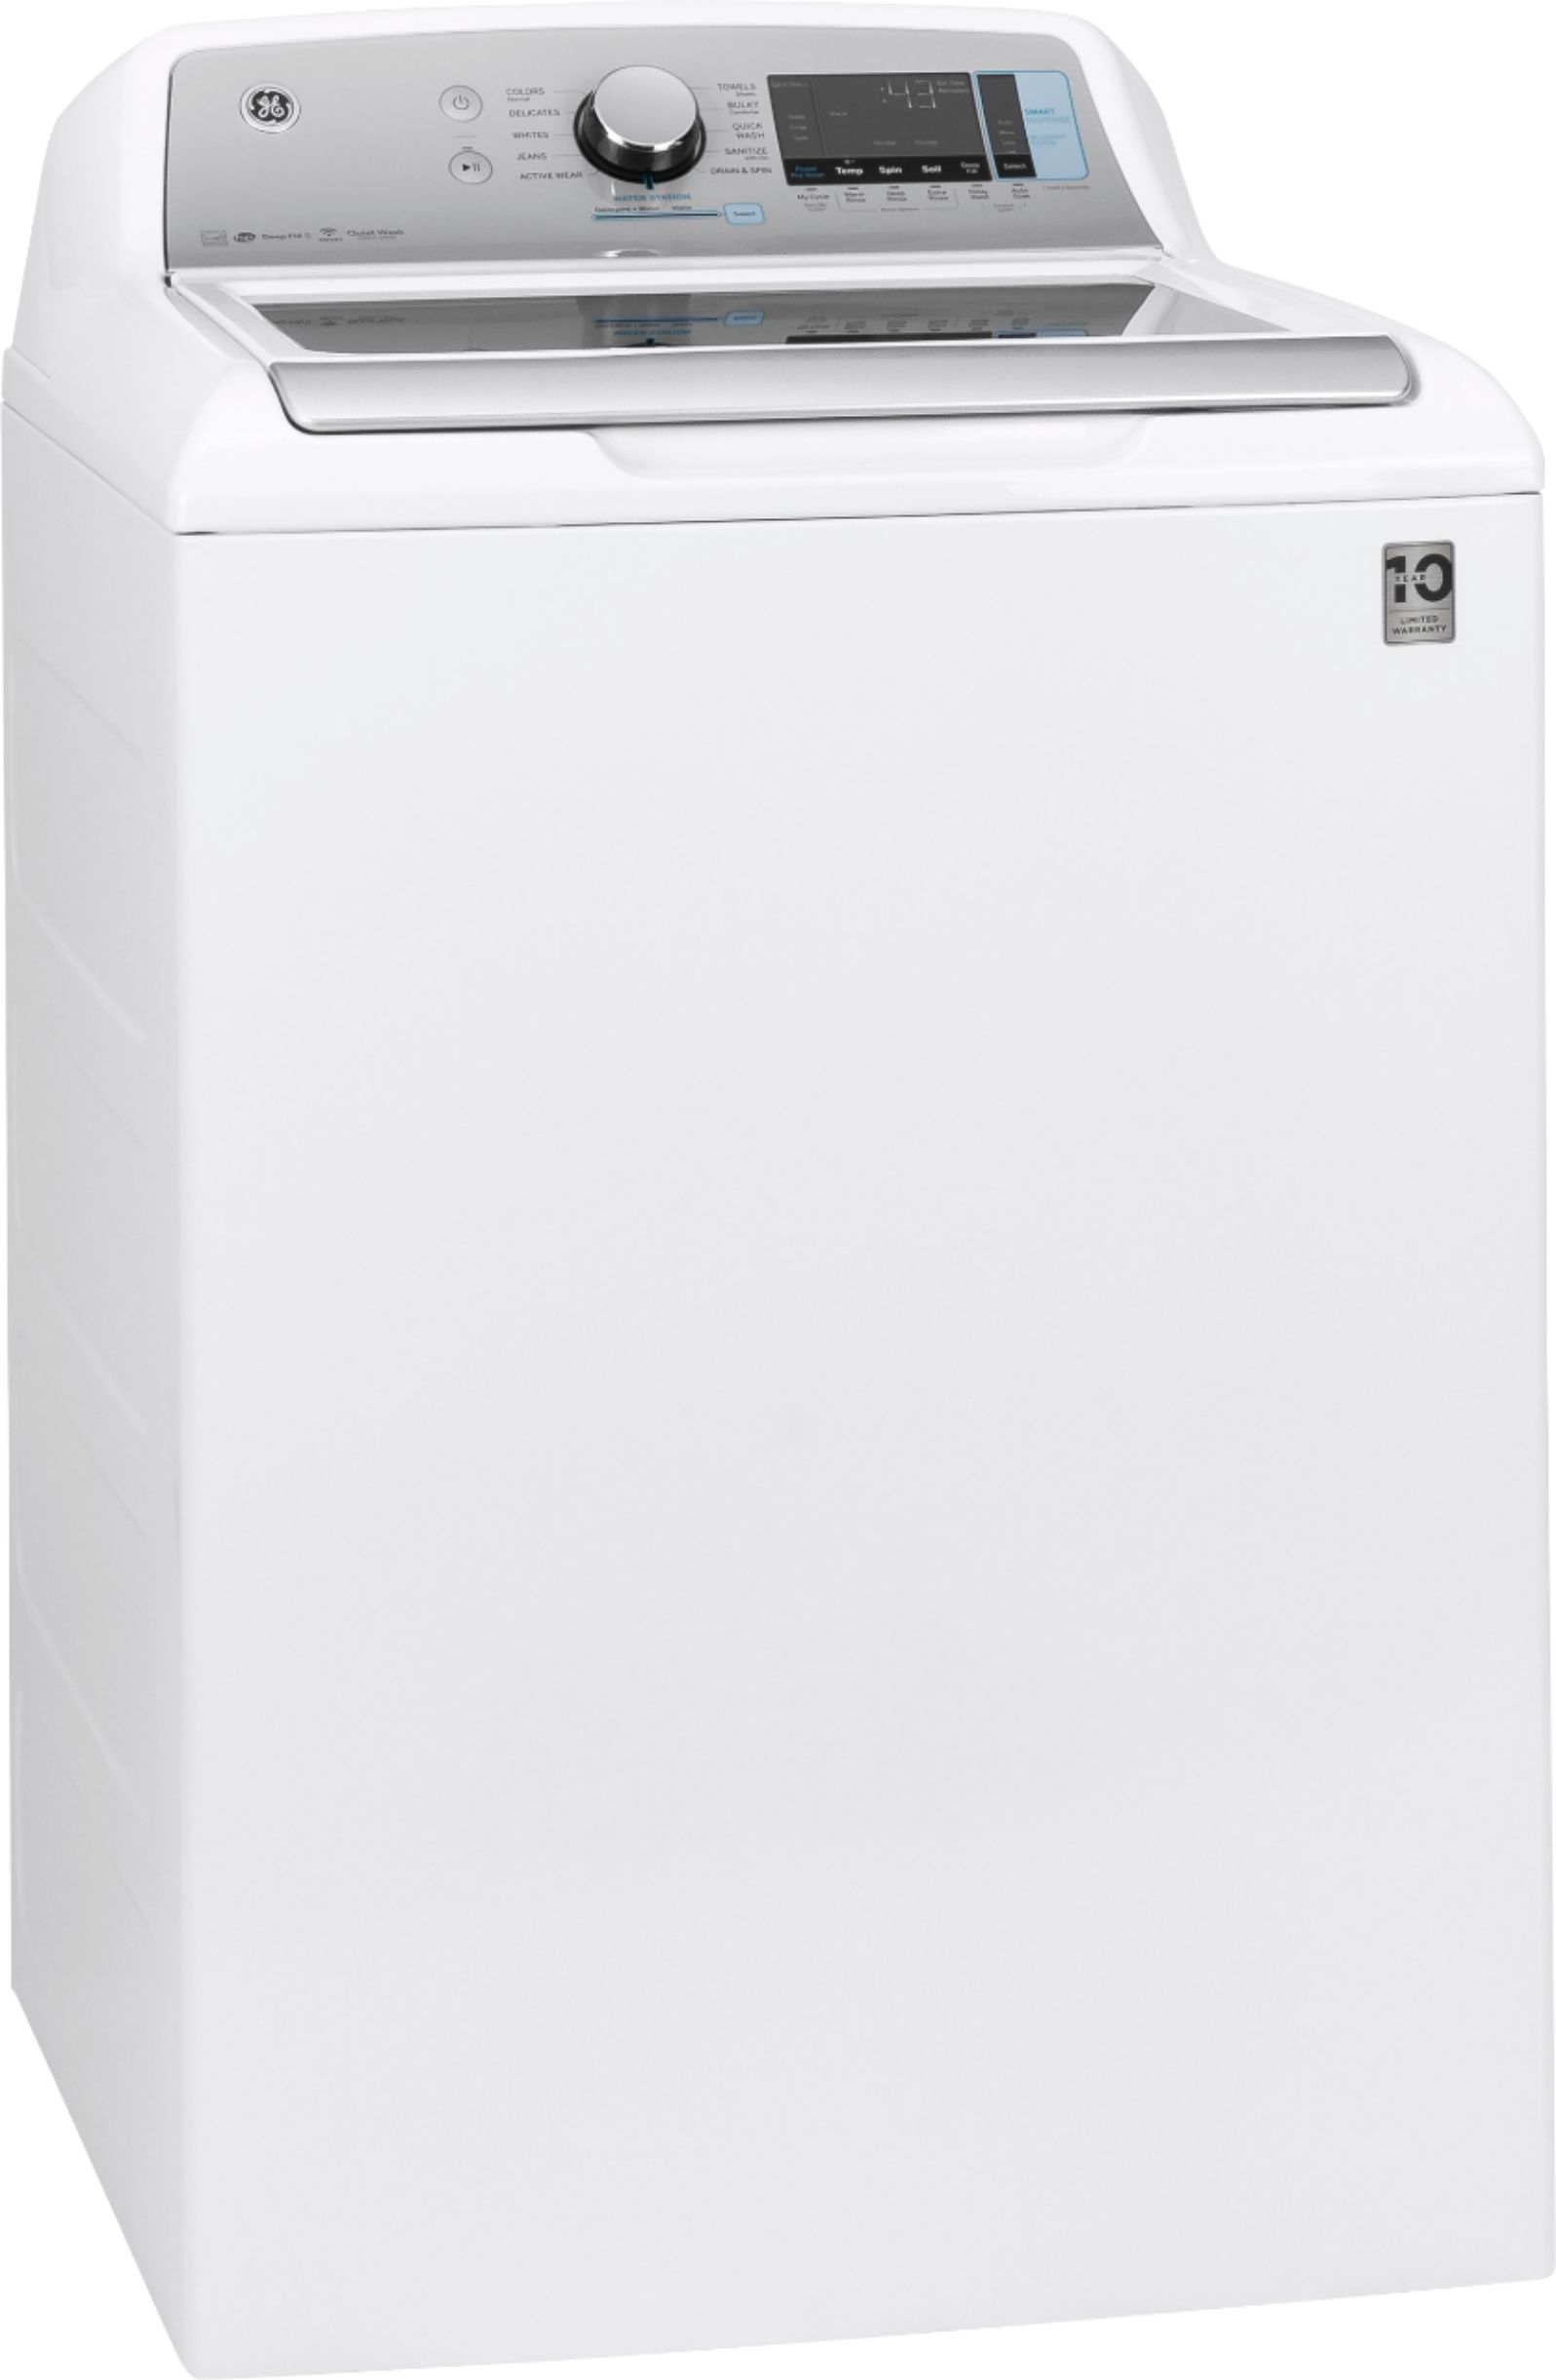 Angle View: GE - 5.2 Cu. Ft. High-Efficiency Top Load Washer - White on White/Silver Backsplash